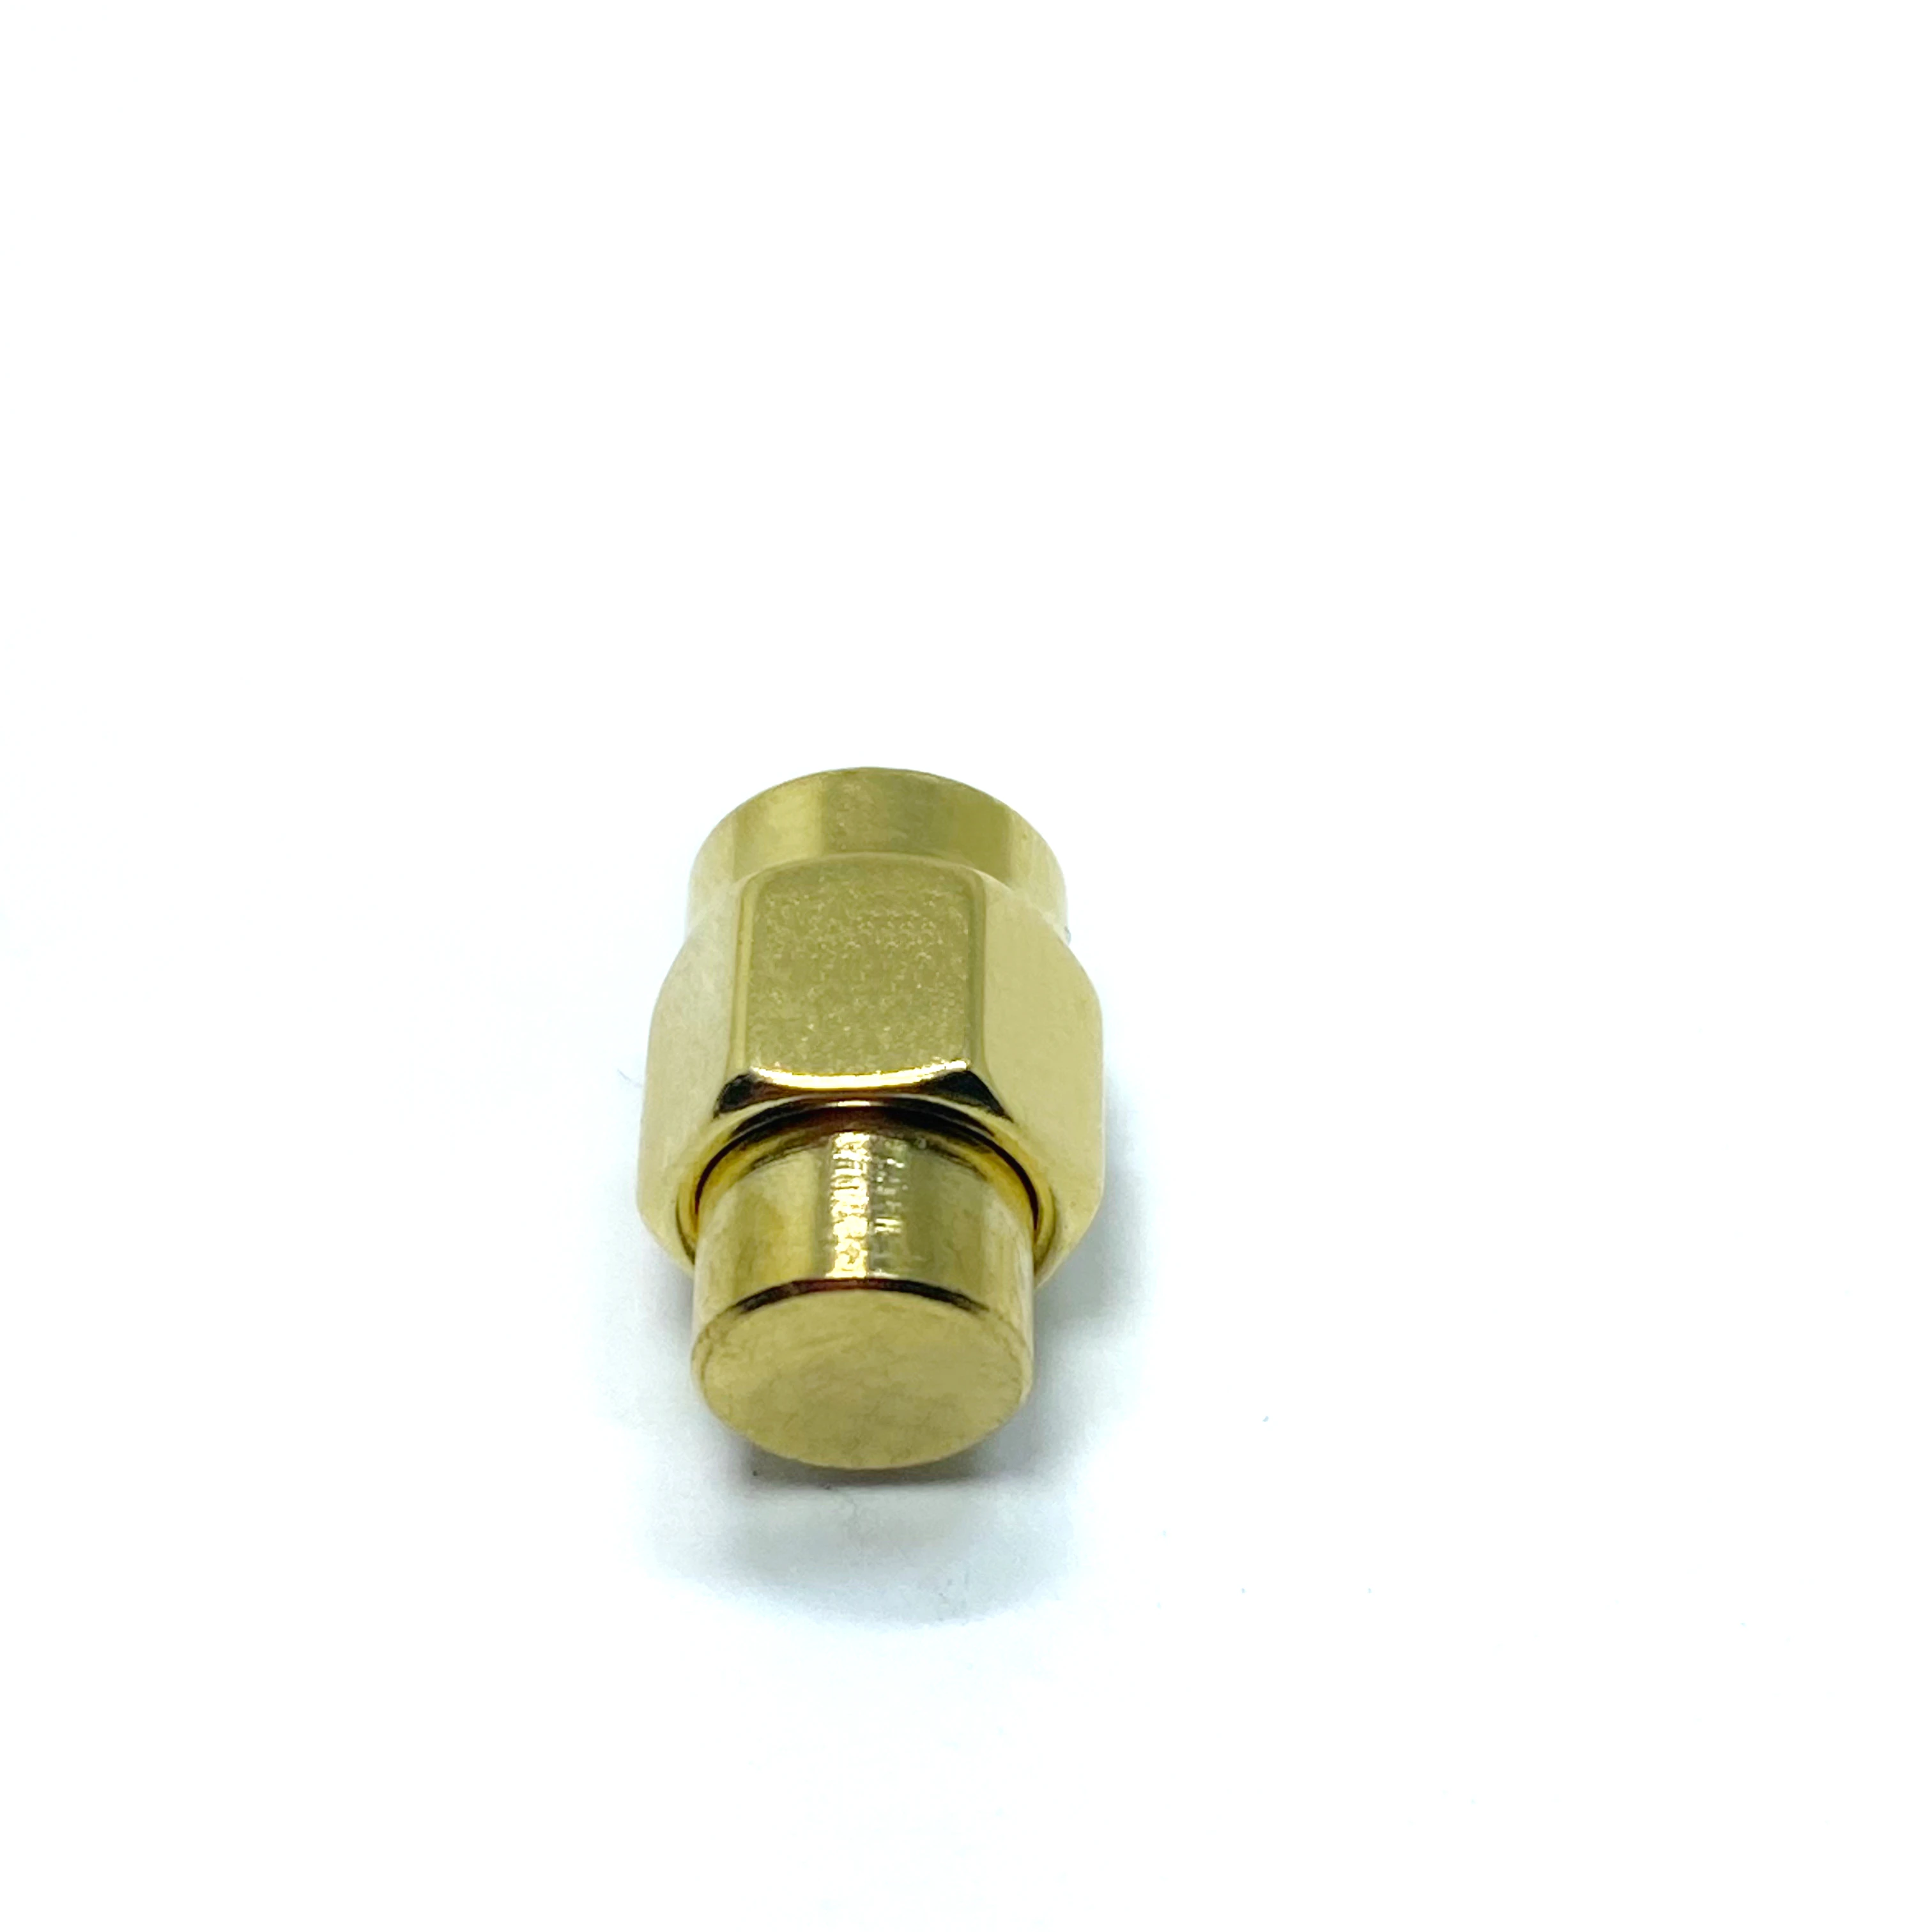 Factory Price Gold Plated Straight 2 Watt 50 Ohm SMA Plug Male RF Coaxial Termination Dummy Loads in stock factory